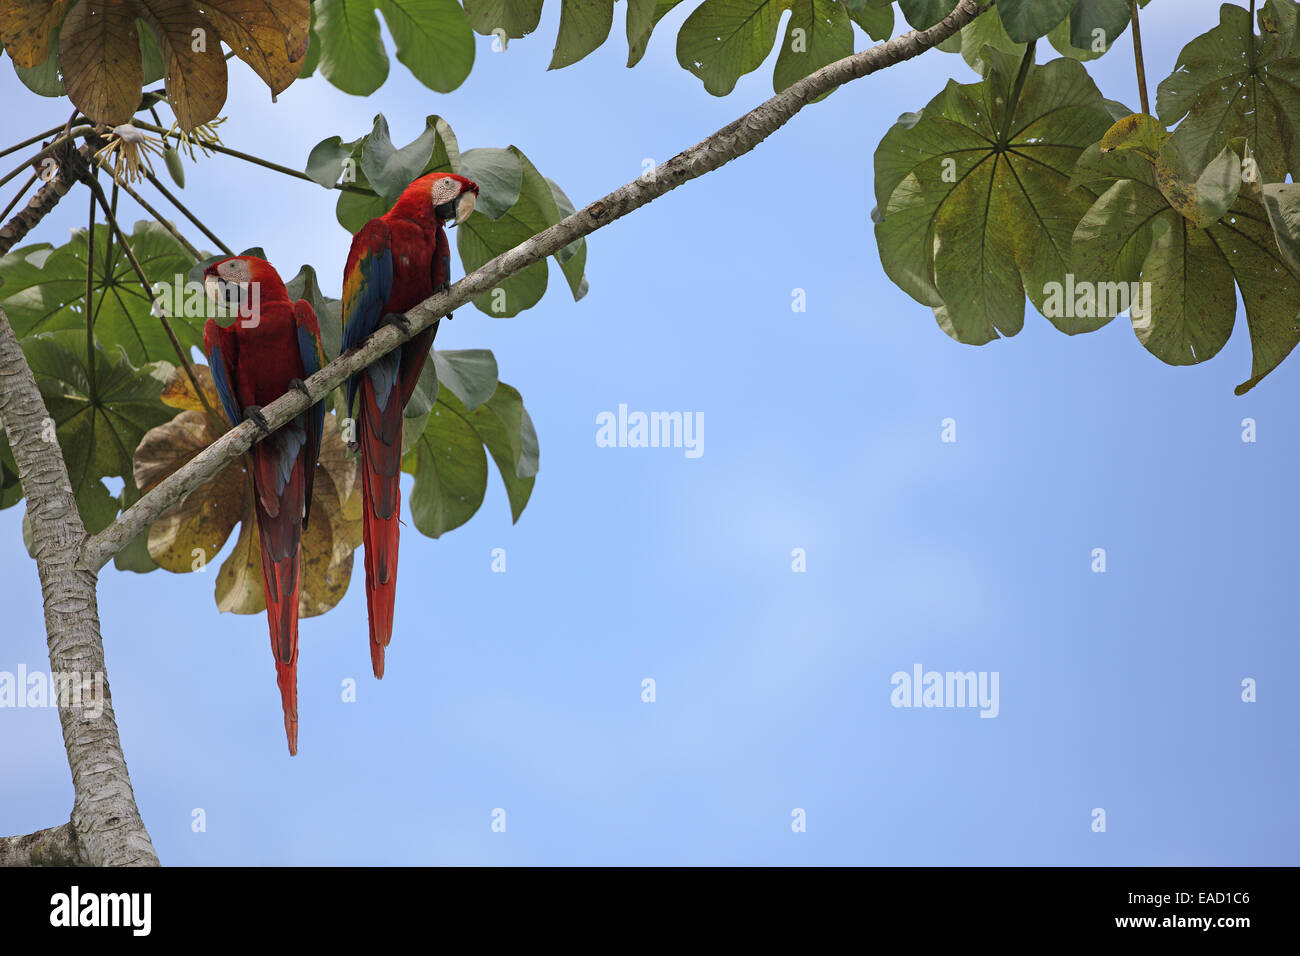 Scarlet Macaw, Ara macao, pair in cecropia tree Stock Photo